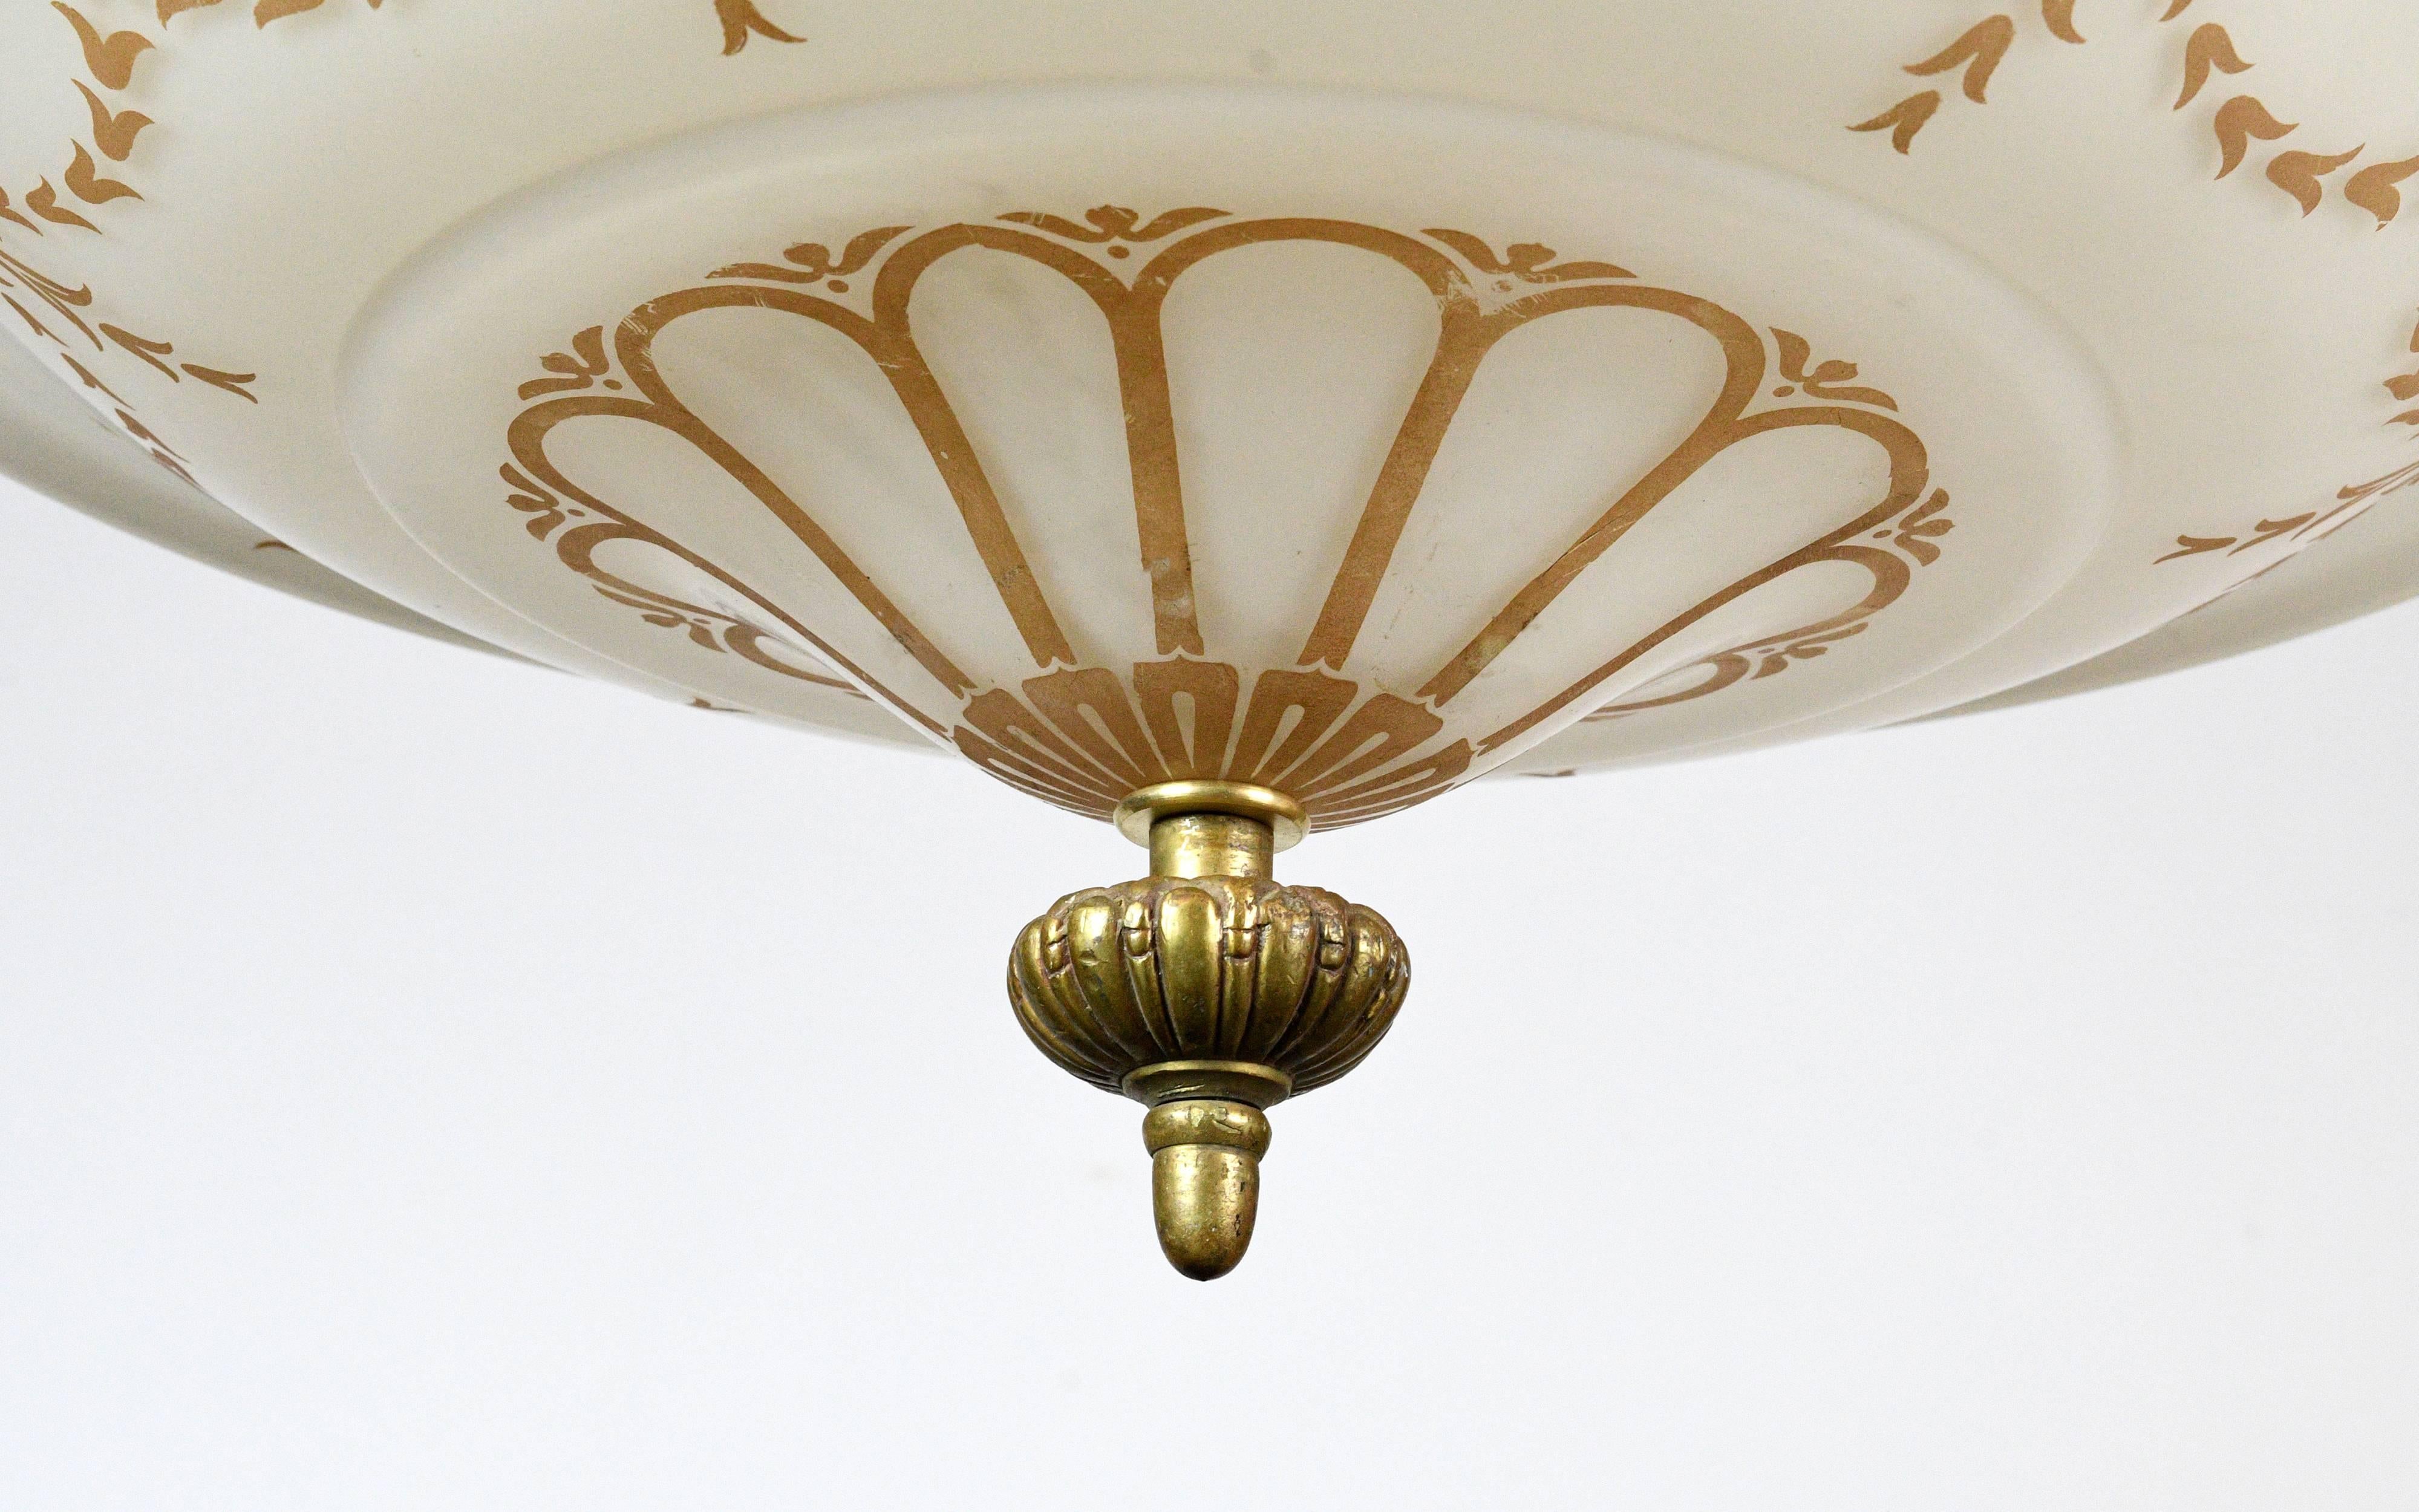 This is Victorian style at its finest. On the surface of the off-white glass shade, a pattern of repeating floral and organic shaped patterns are etched. The shiny gold-colored fitter is highly decorative, and the acanthus leaves are an added bonus,